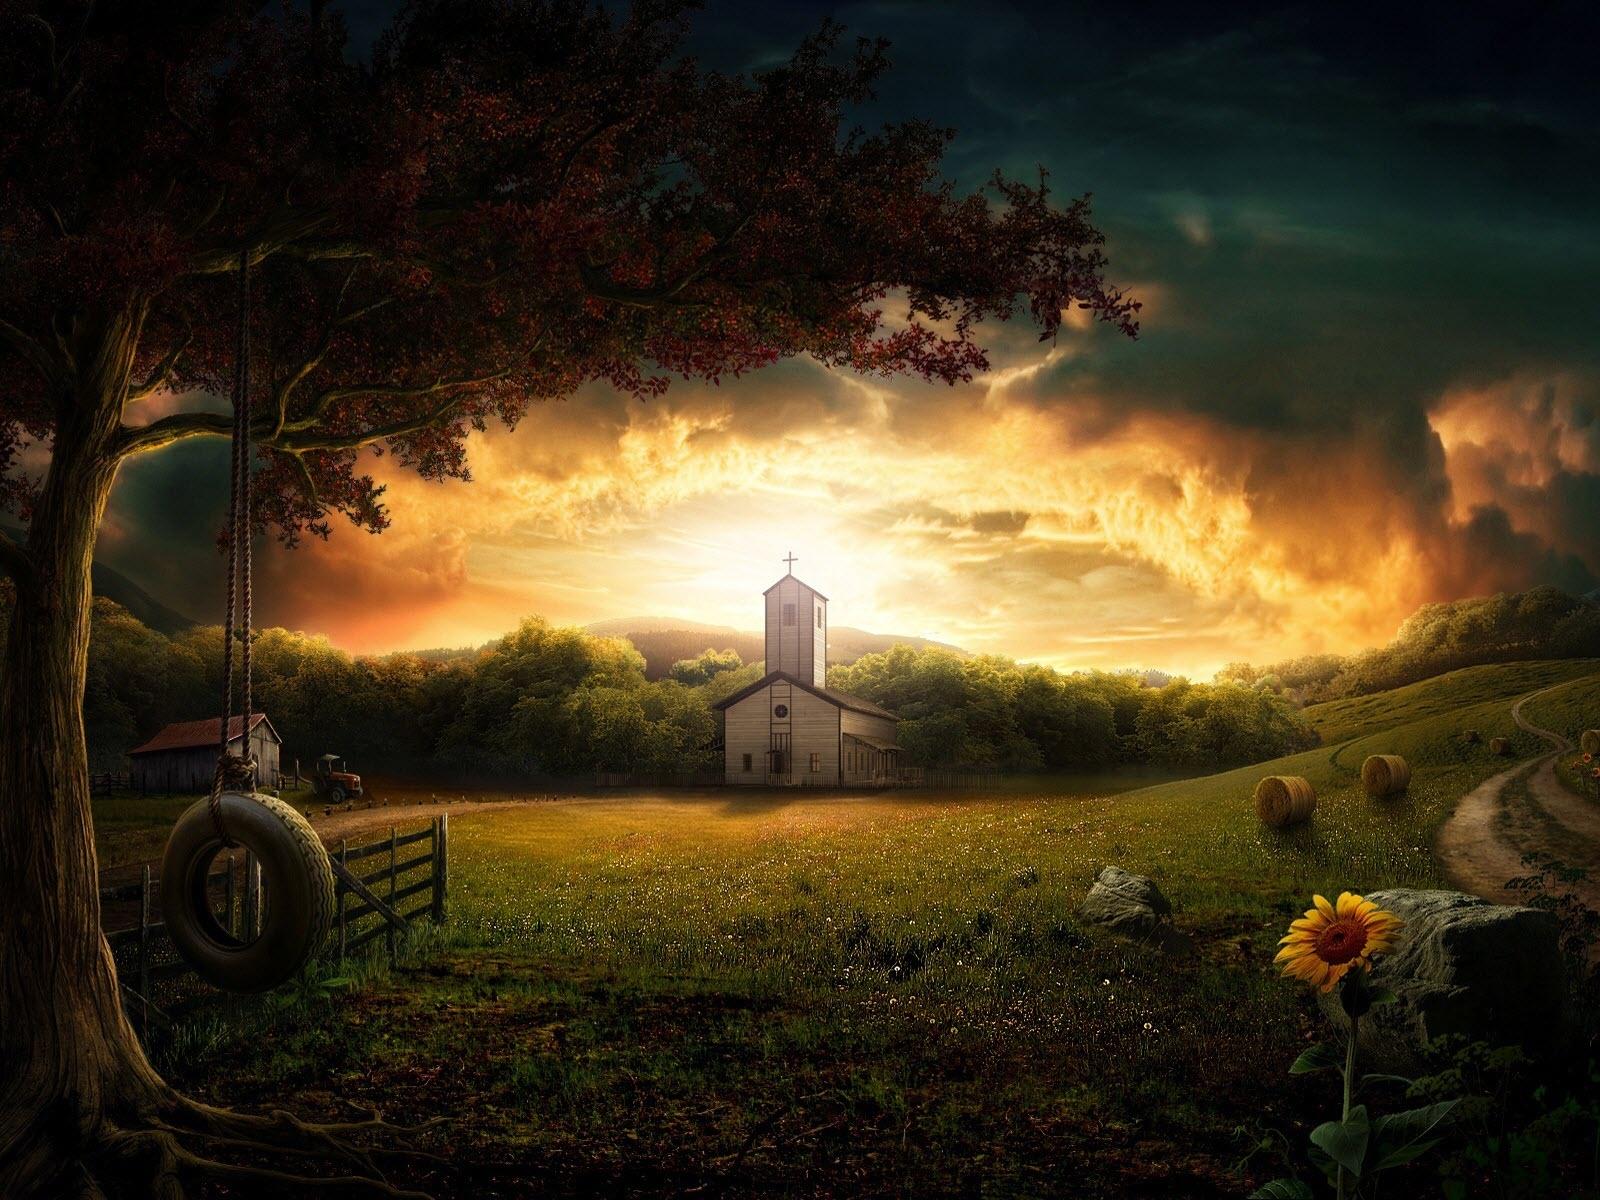 House of Dreams Wallpaper in jpg format for free download